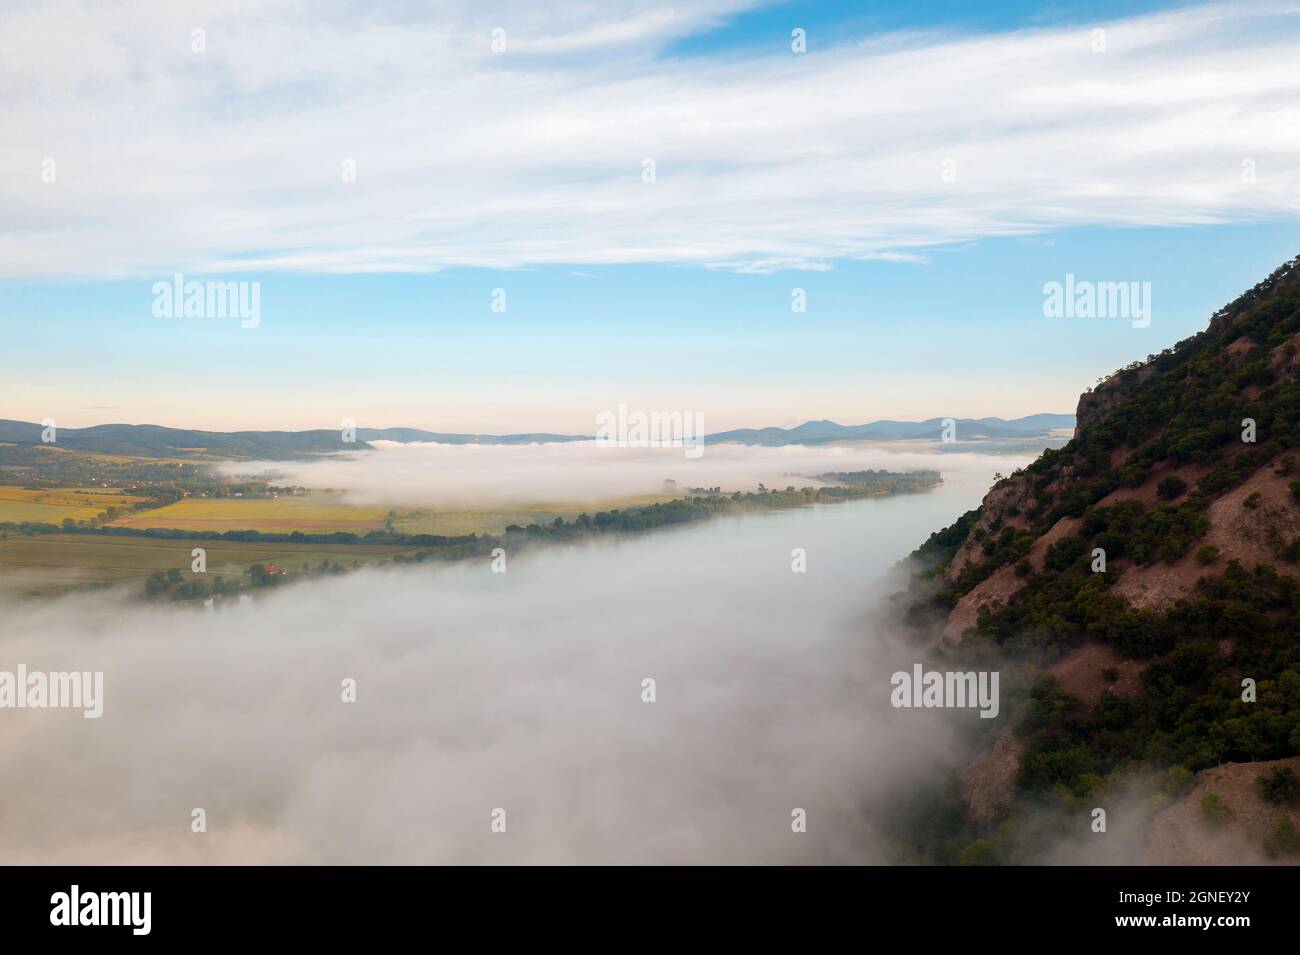 Foggy morning over the Danube river in Hugary. This photo made in Danube bend near by Esztergom city. Amazing landscape with haze. Stock Photo